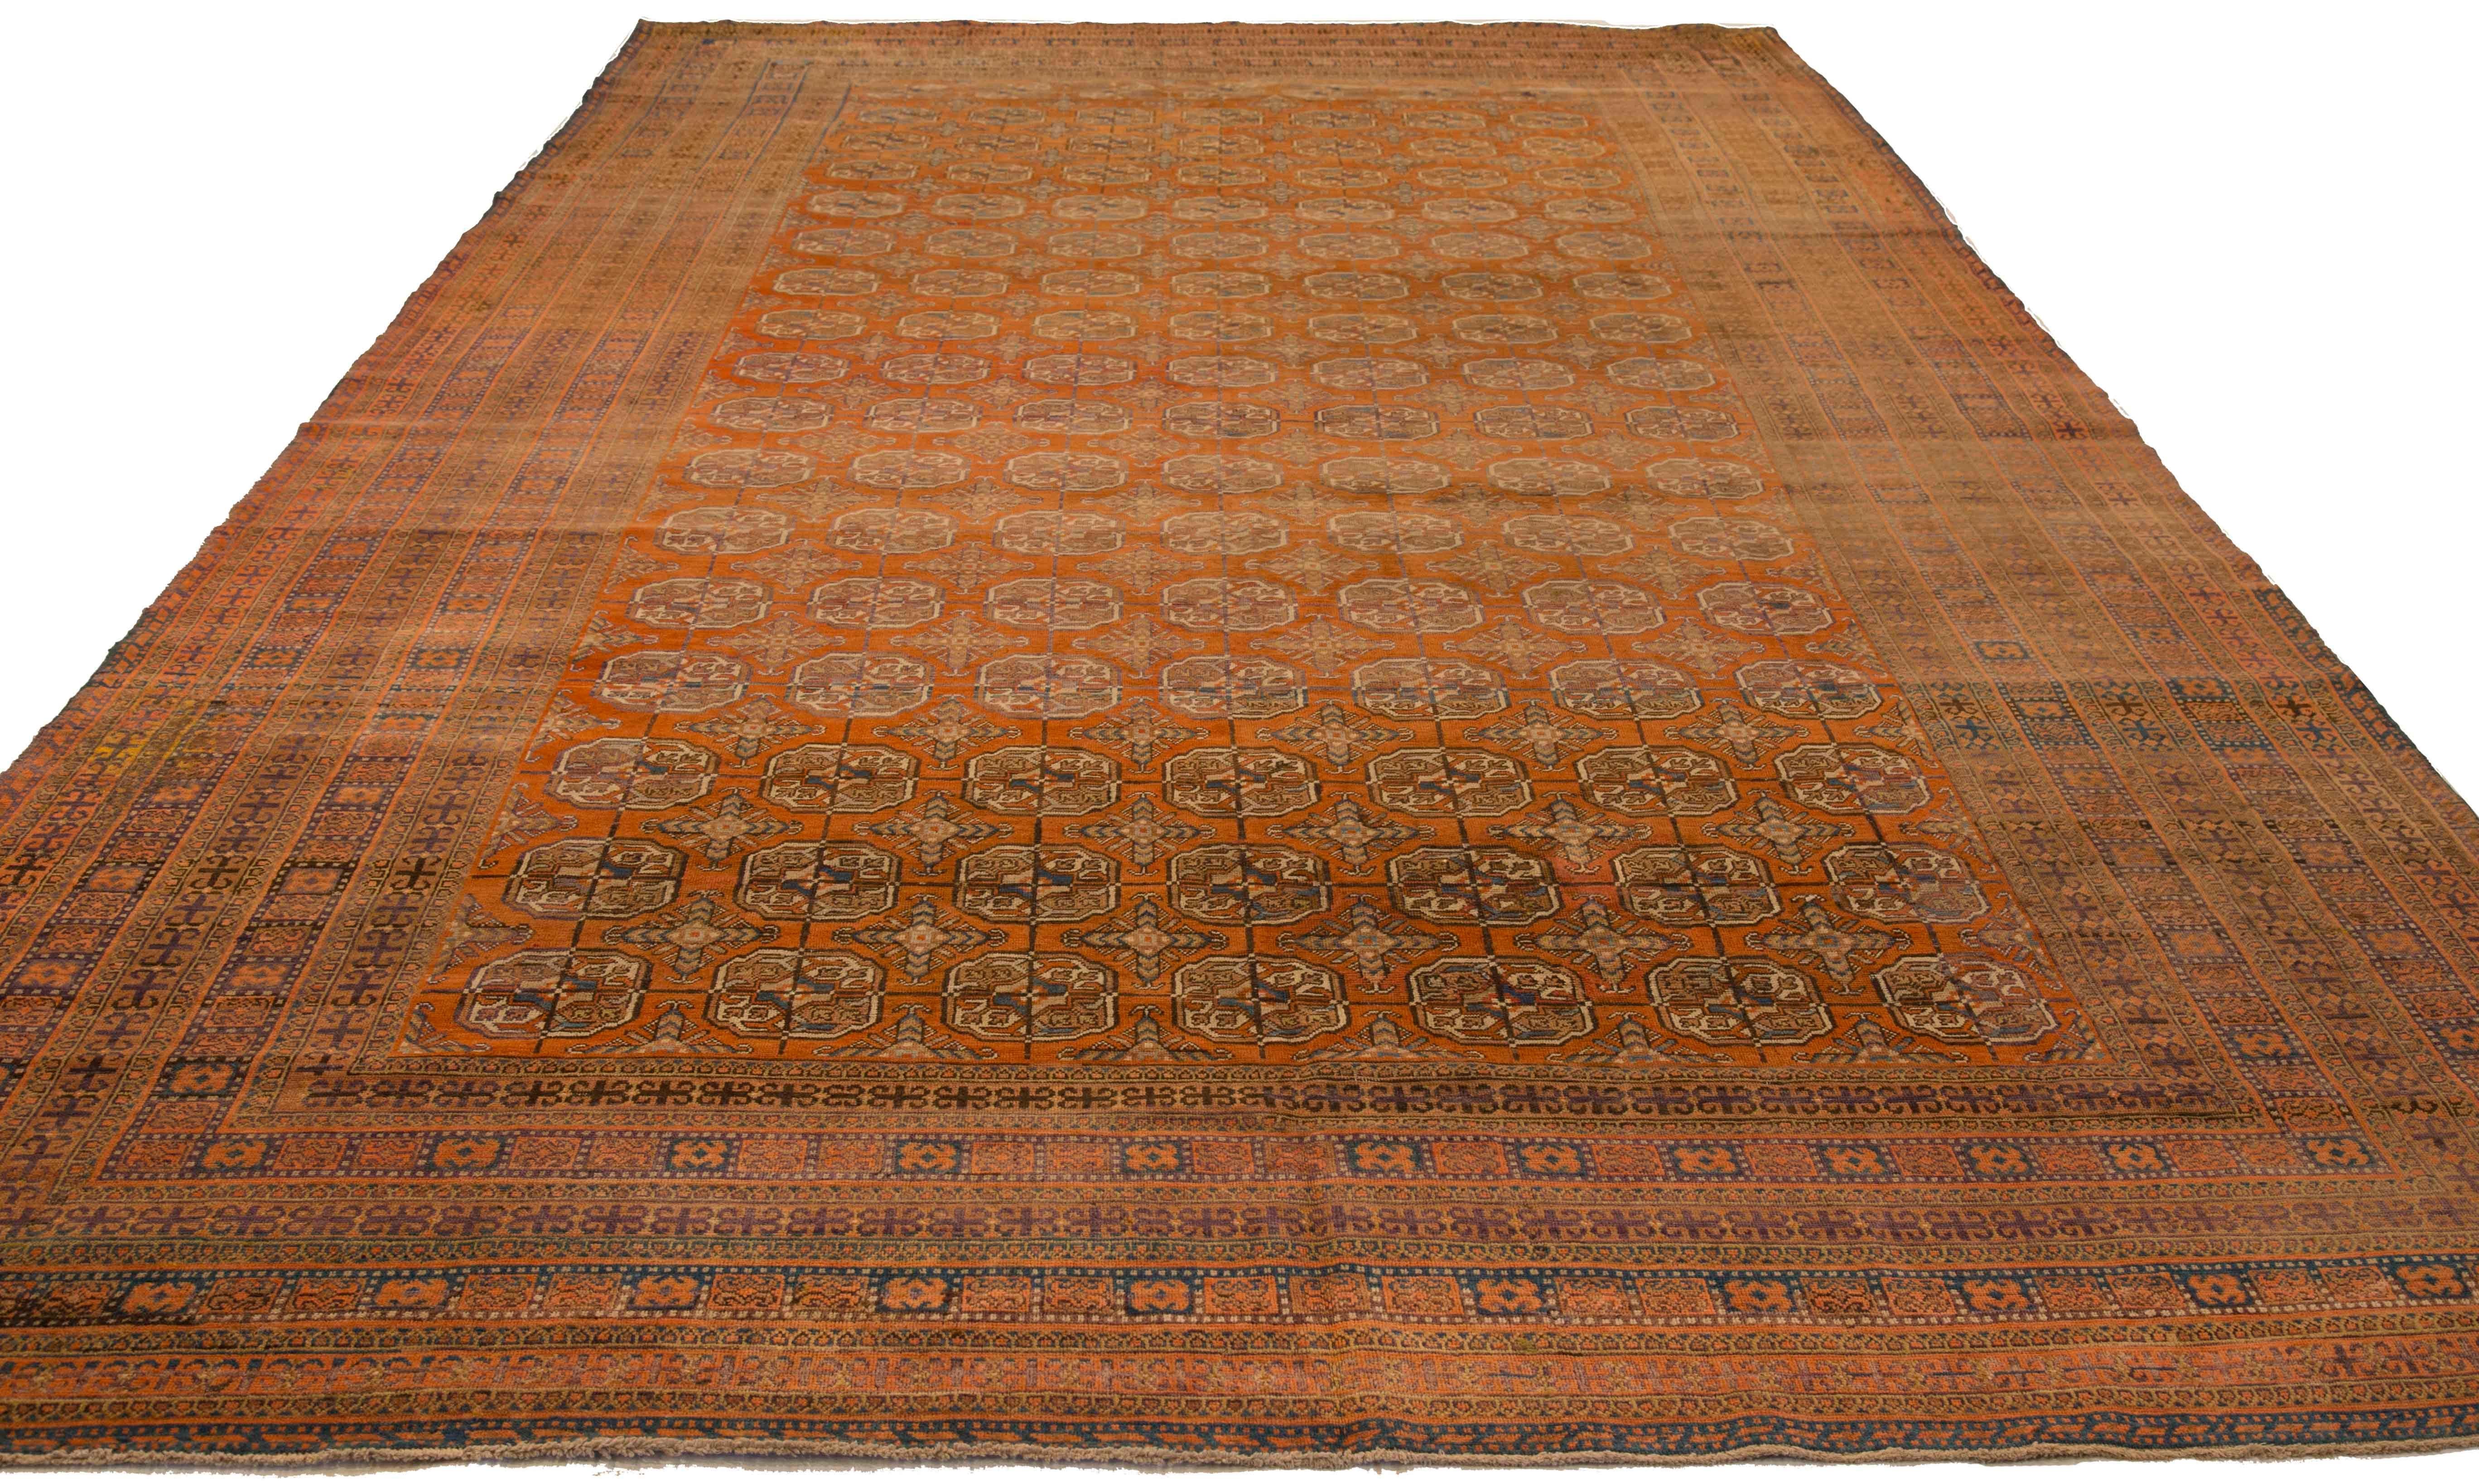 Antique Persian rug handwoven from the finest sheep’s wool and colored with all-natural vegetable dyes that are safe for humans and pets. It’s a traditional Bijar design featuring floral details in red, pink, green and brown. It’s a beautiful piece